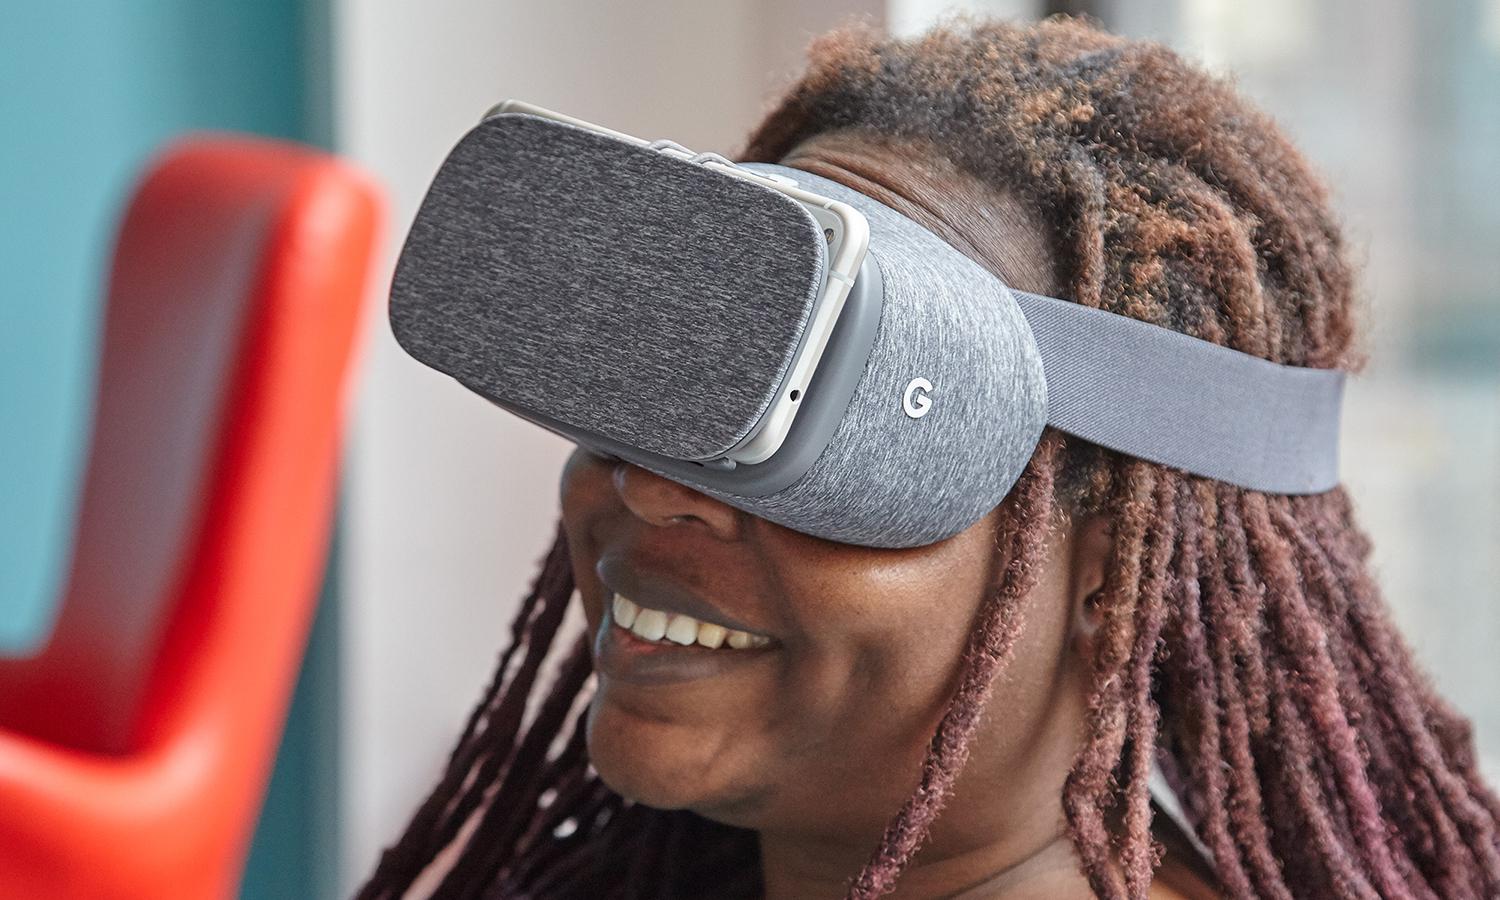 Google's VR Headset Drops to $30